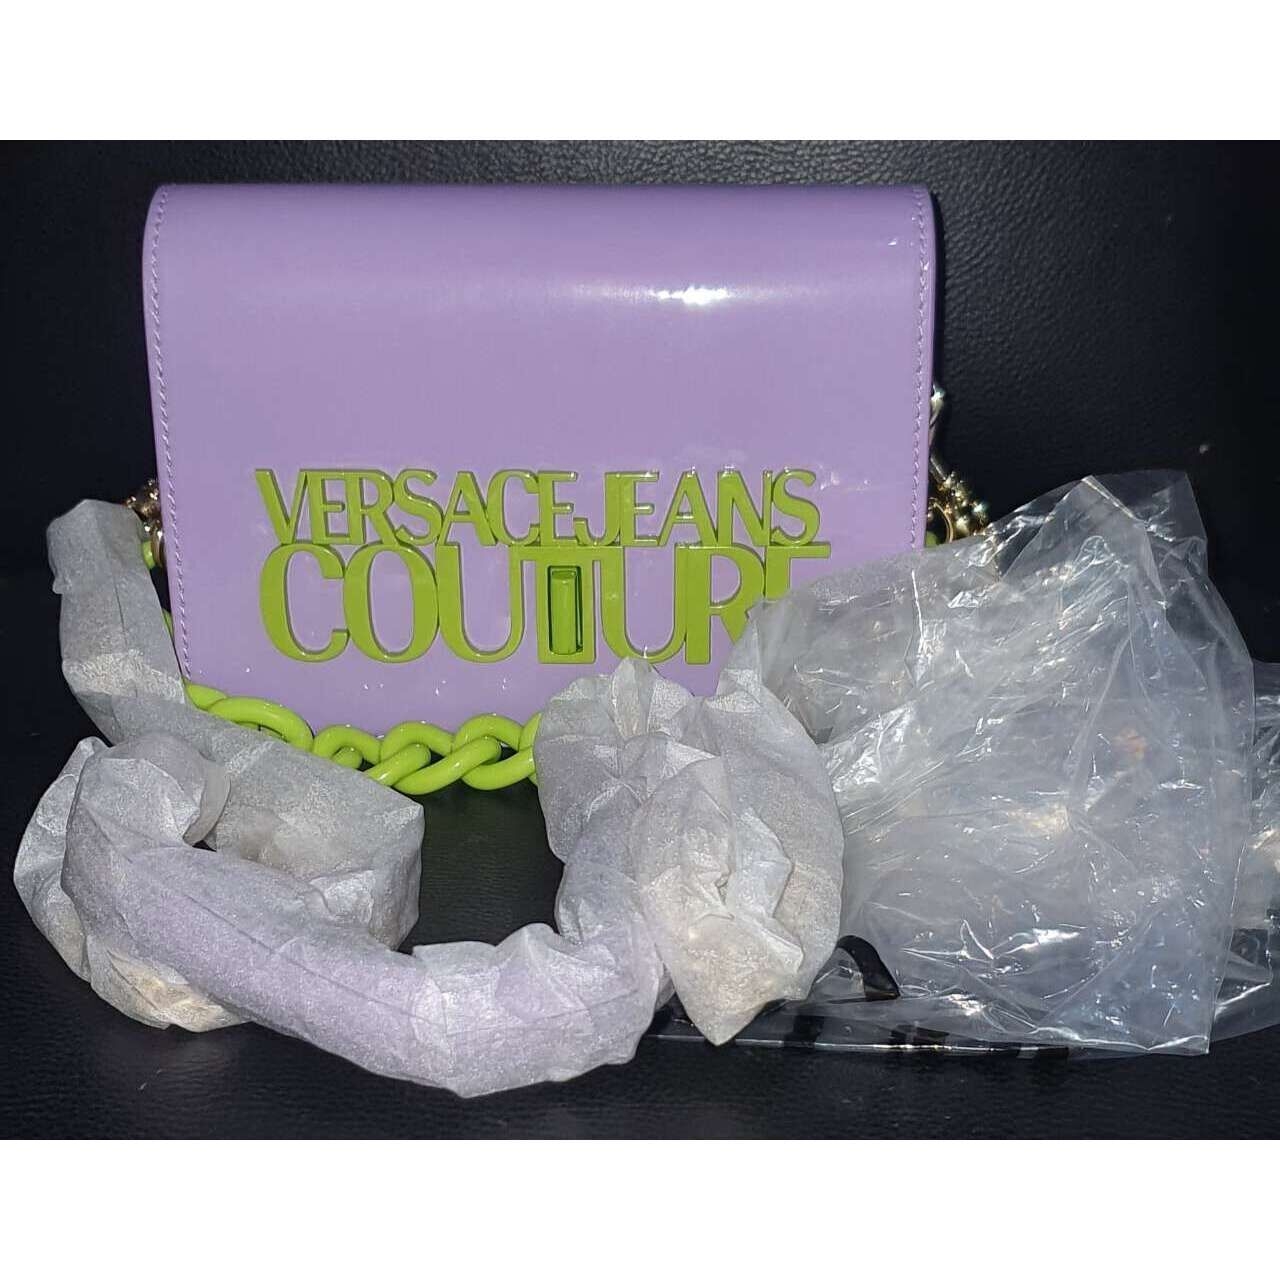 Versace Jeans Couture Purple Sling Bag